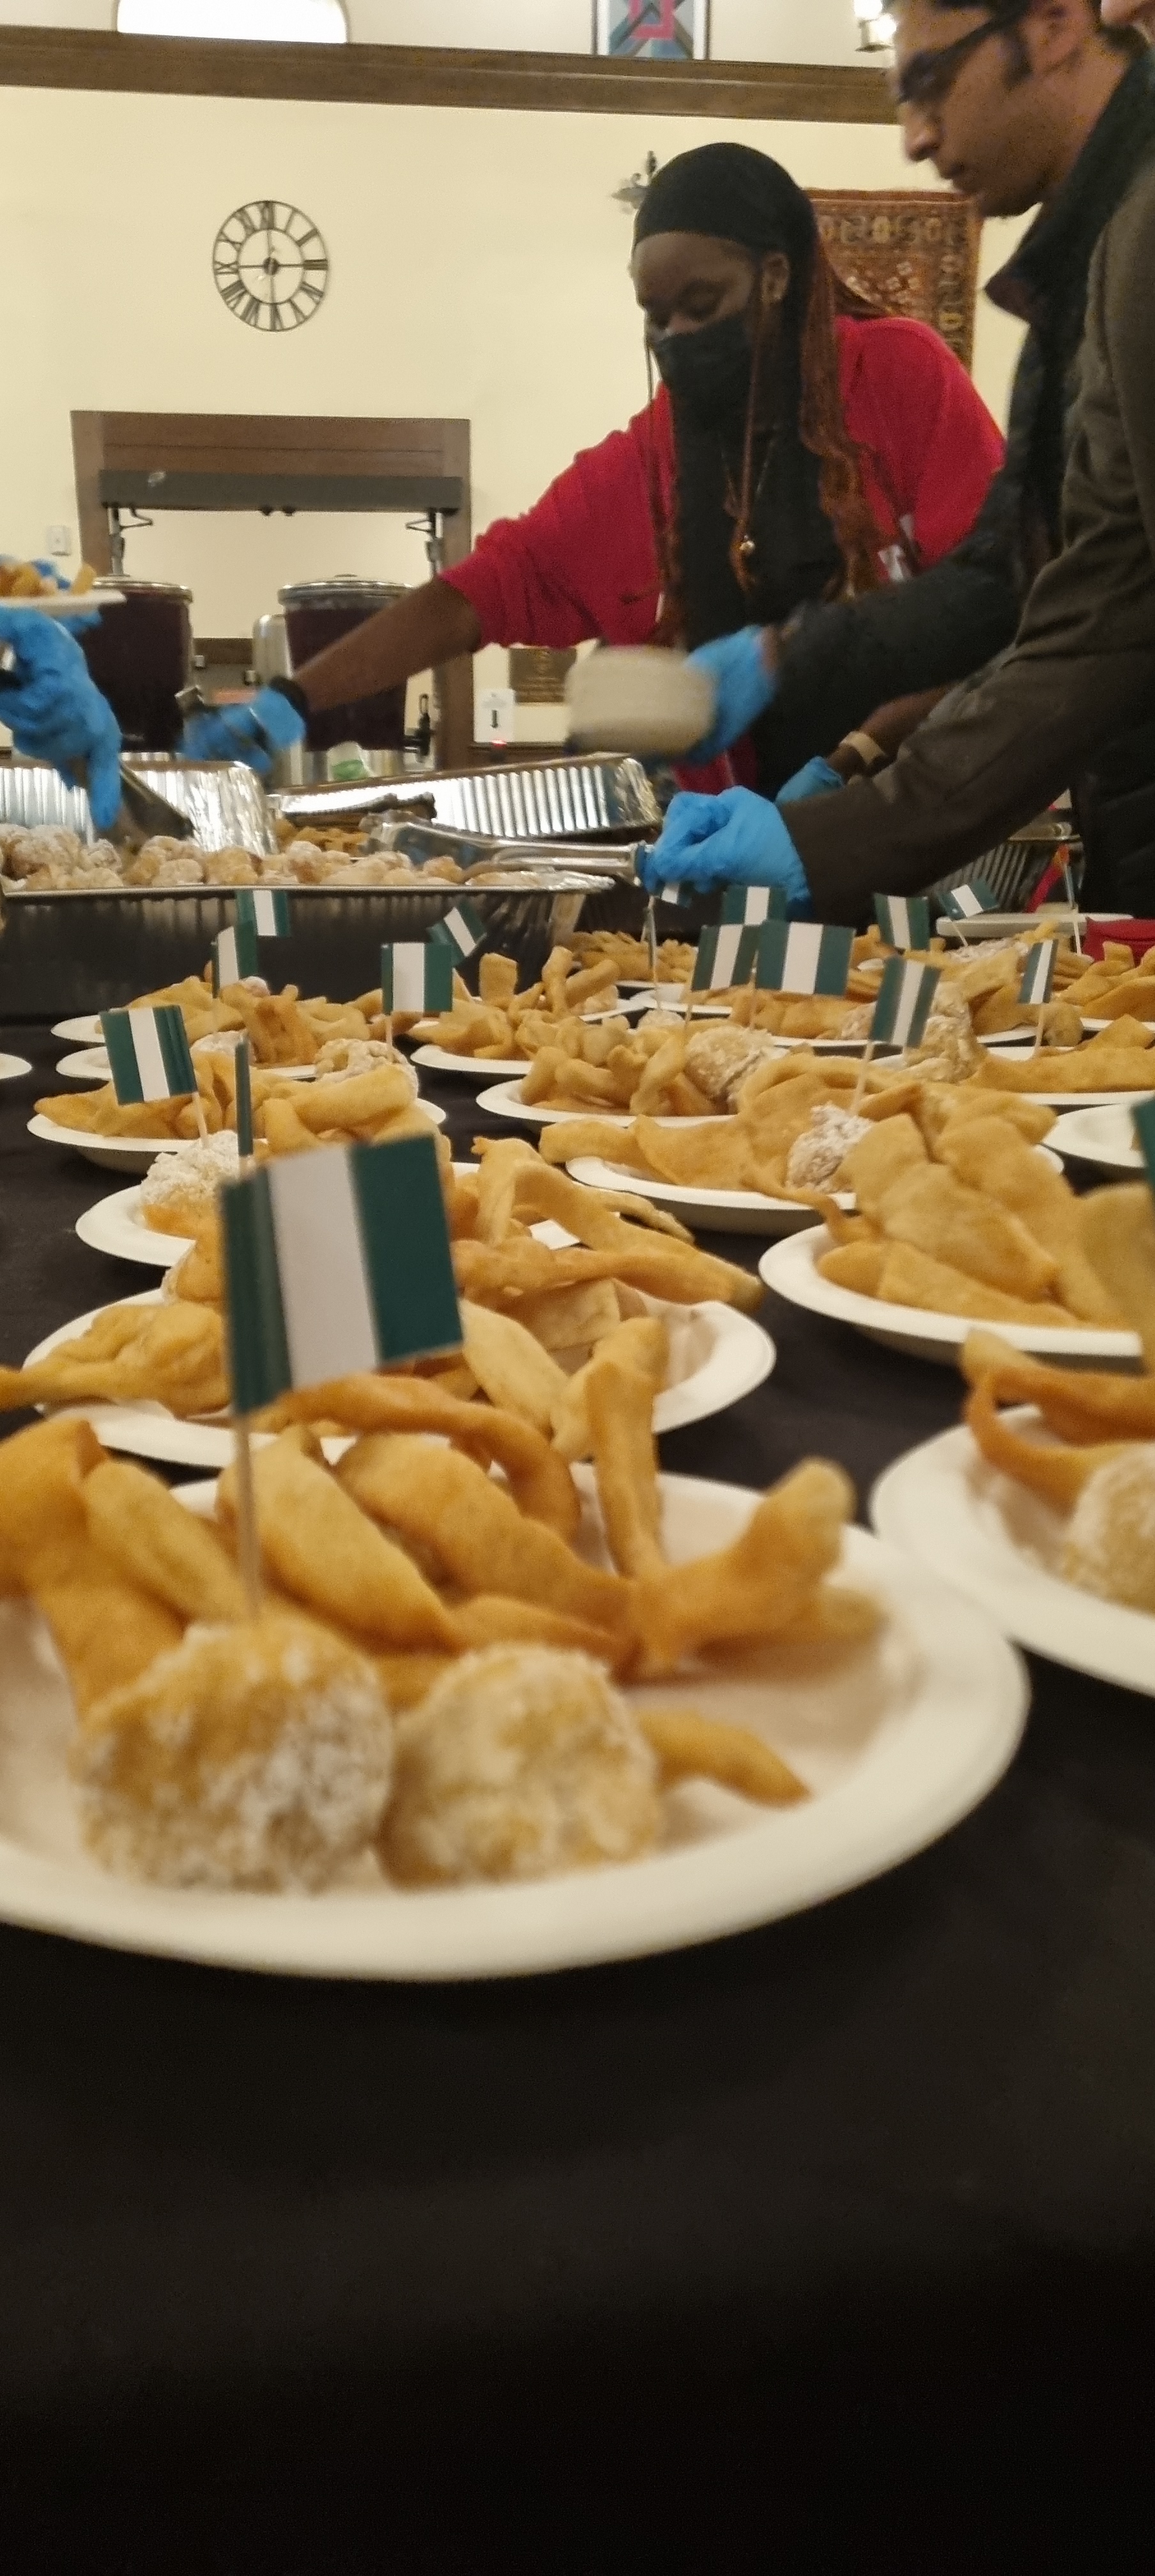 Nigerian foods emblazoned with the flag.